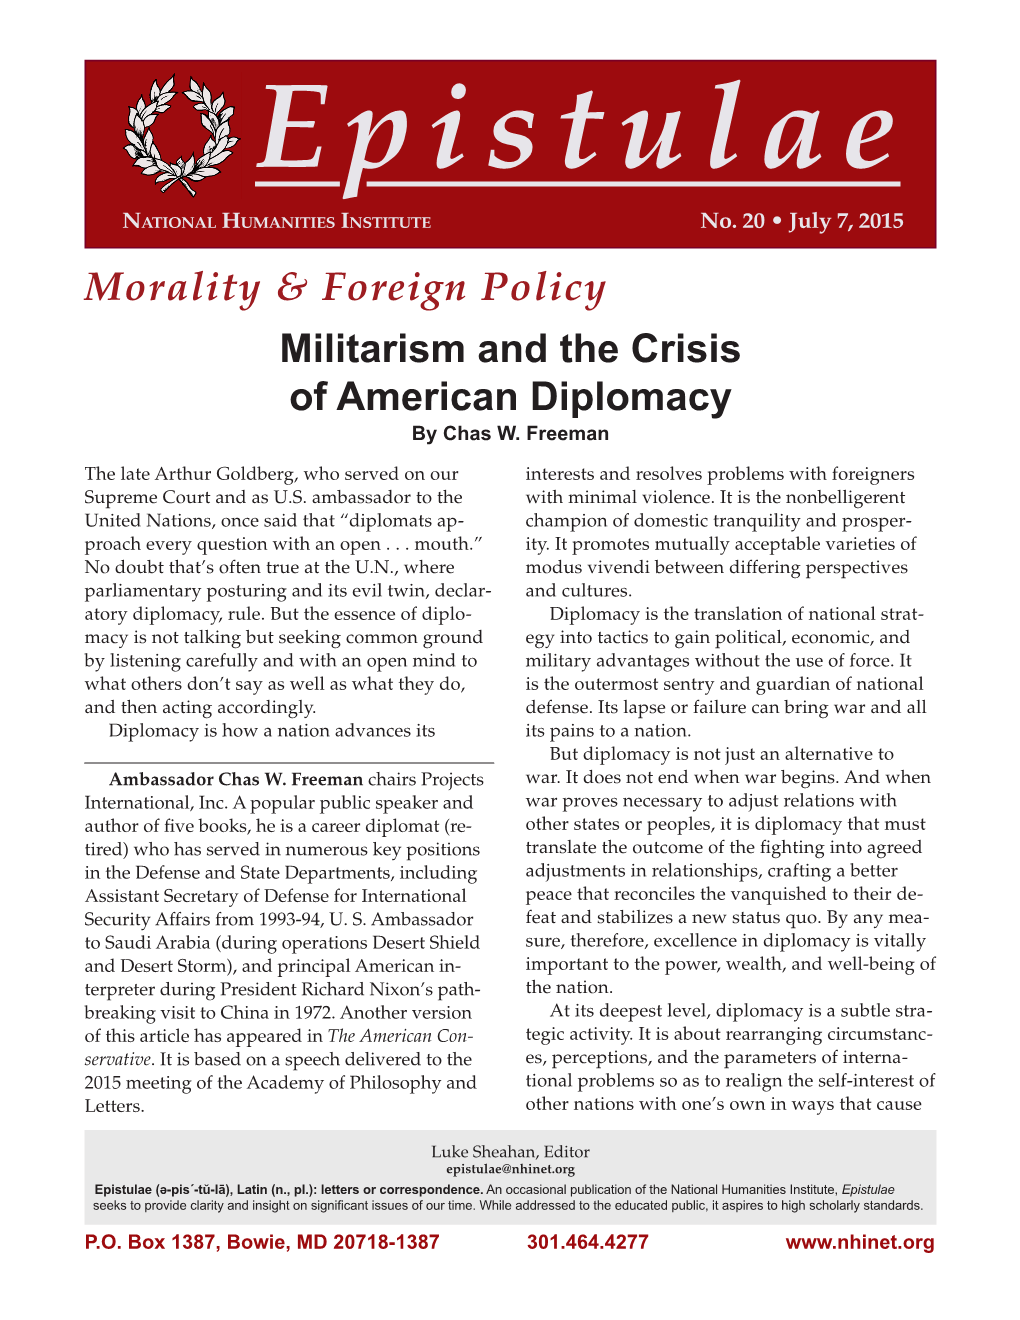 Morality & Foreign Policy Militarism and the Crisis of American Diplomacy